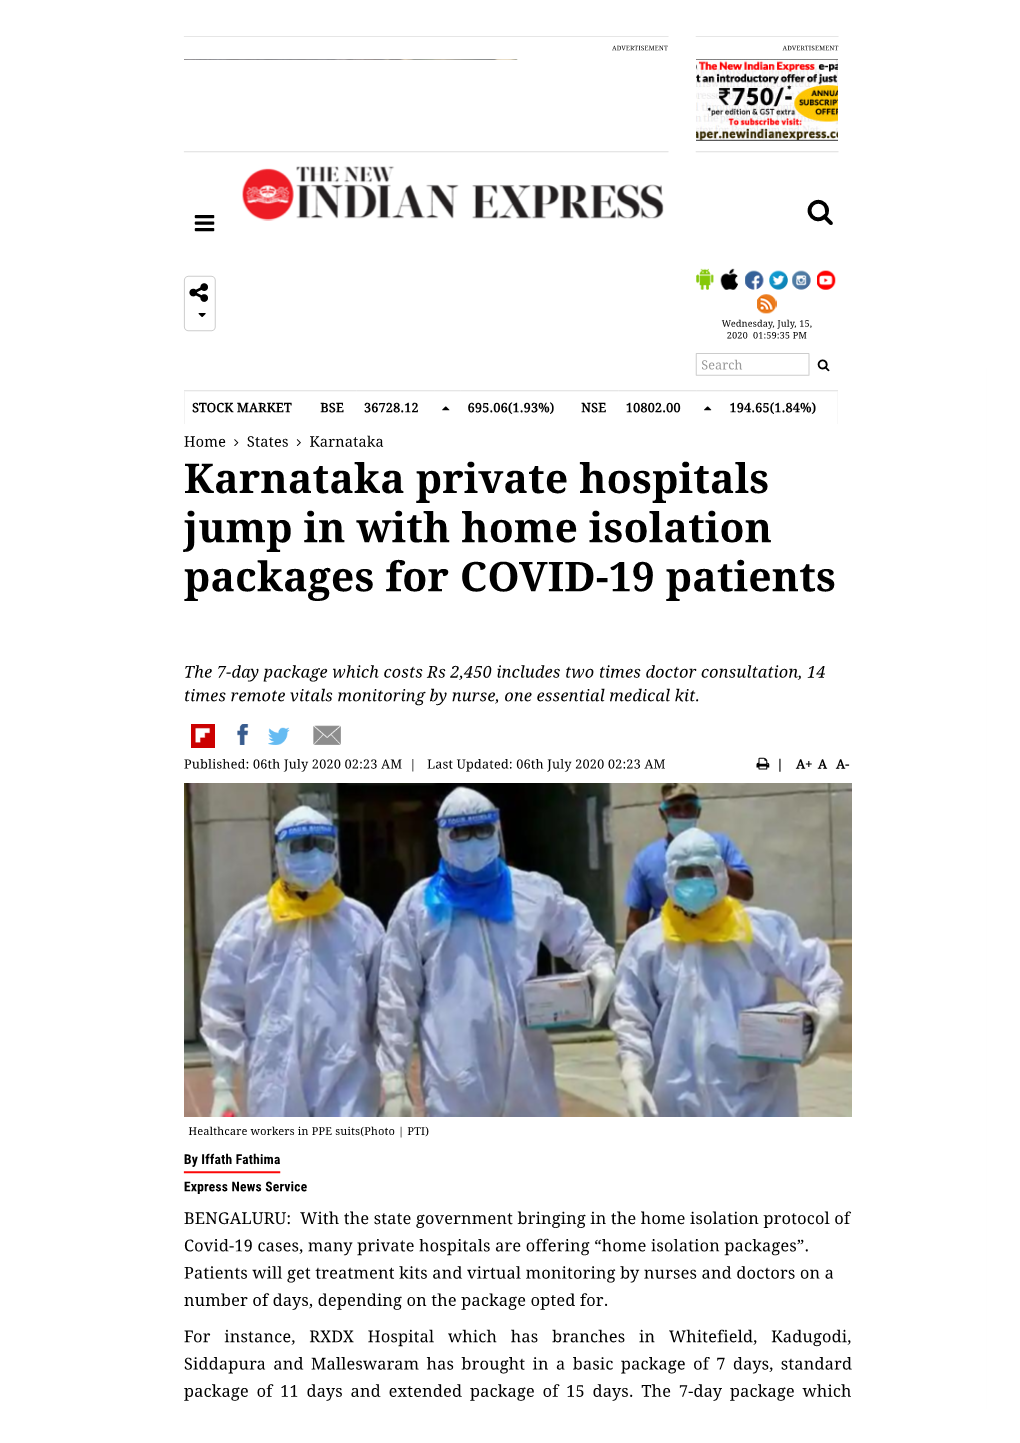 Karnataka Private Hospitals Jump in with Home Isolation Packages for COVID-19 Patients